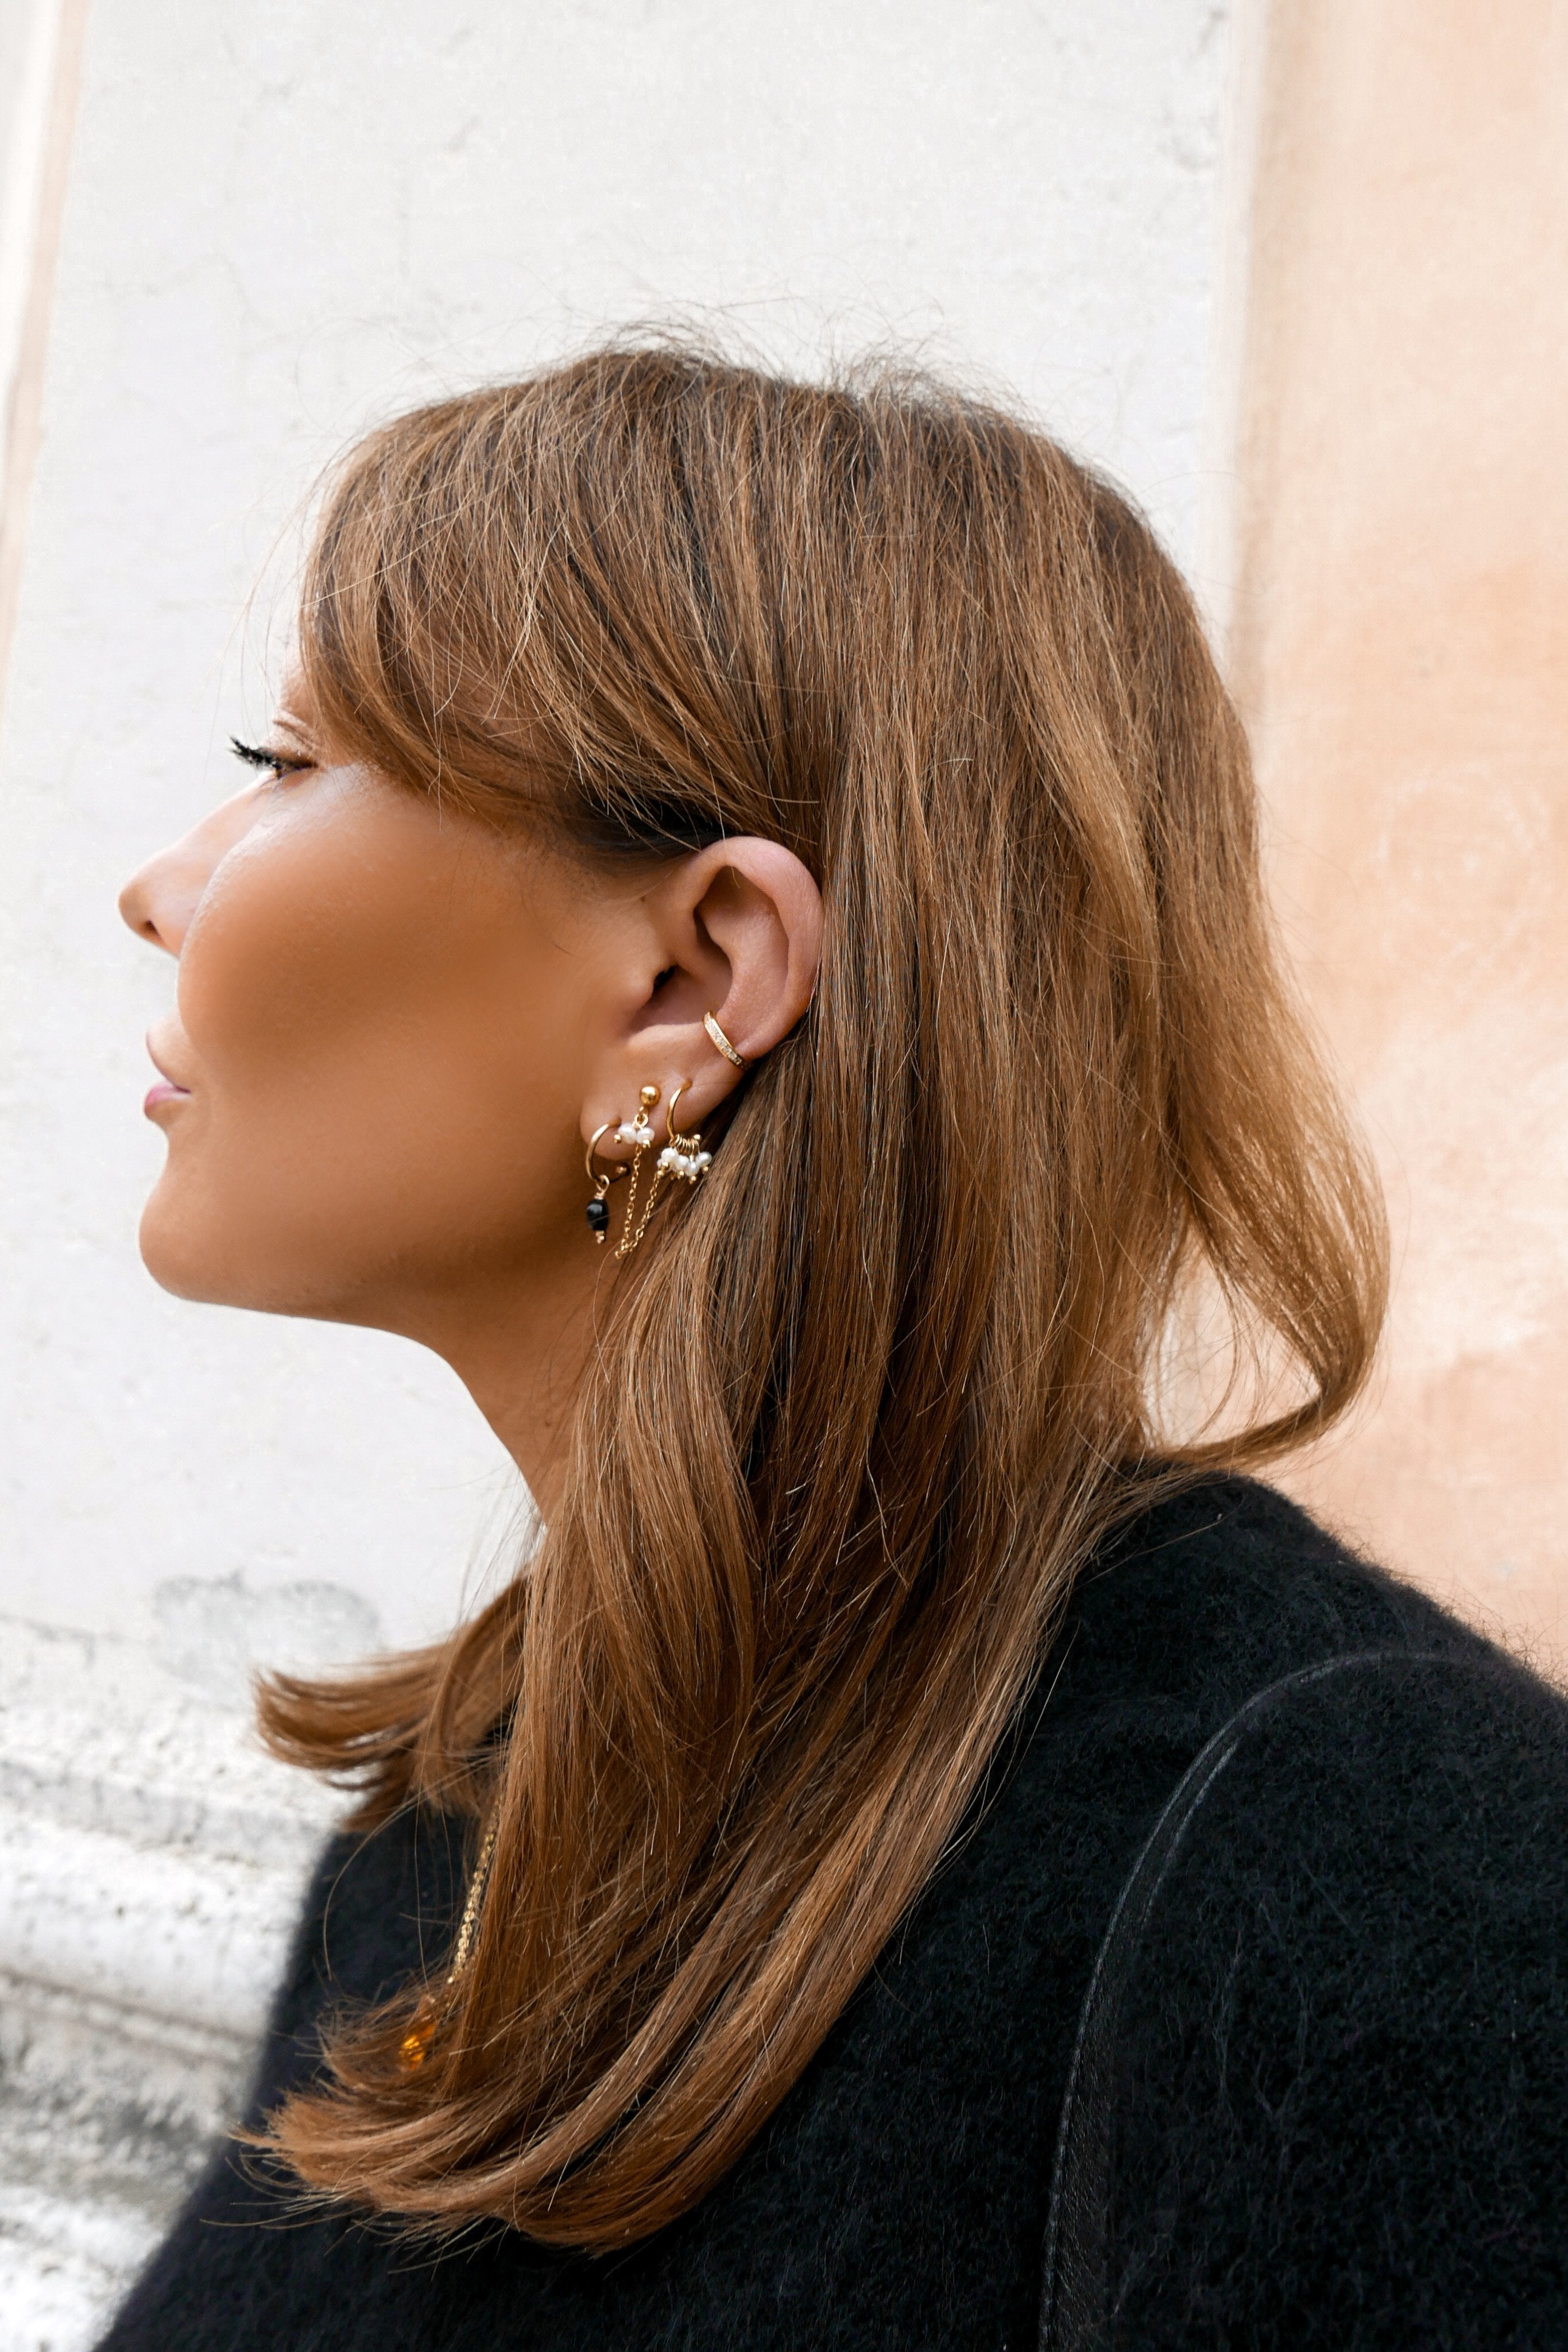 Blanche Earrings - Boutique Minimaliste has waterproof, durable, elegant and vintage inspired jewelry